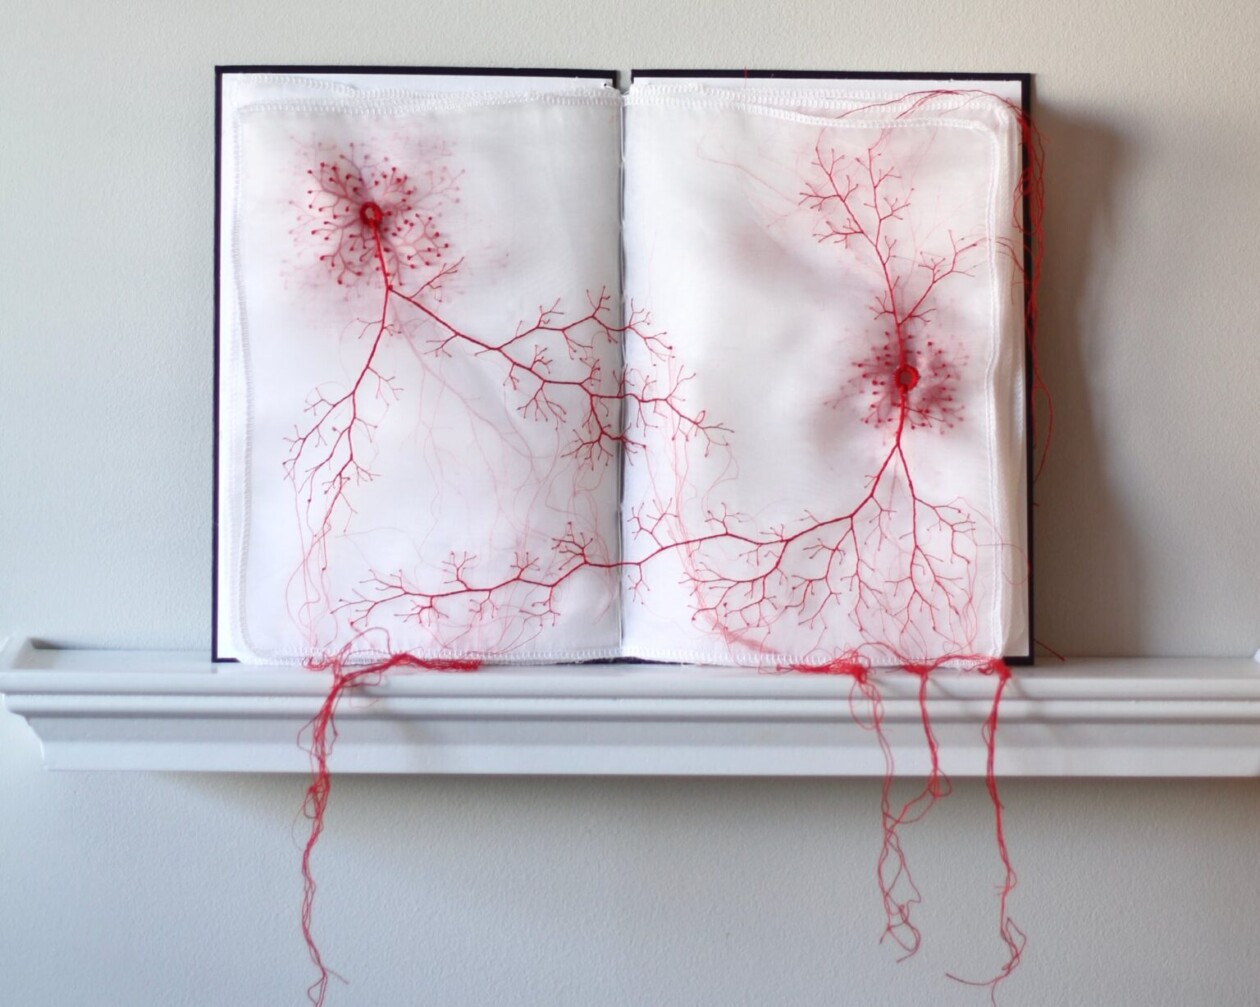 Red Threads, Intriguing Mixed Media Sculptures By Rima Day (2)